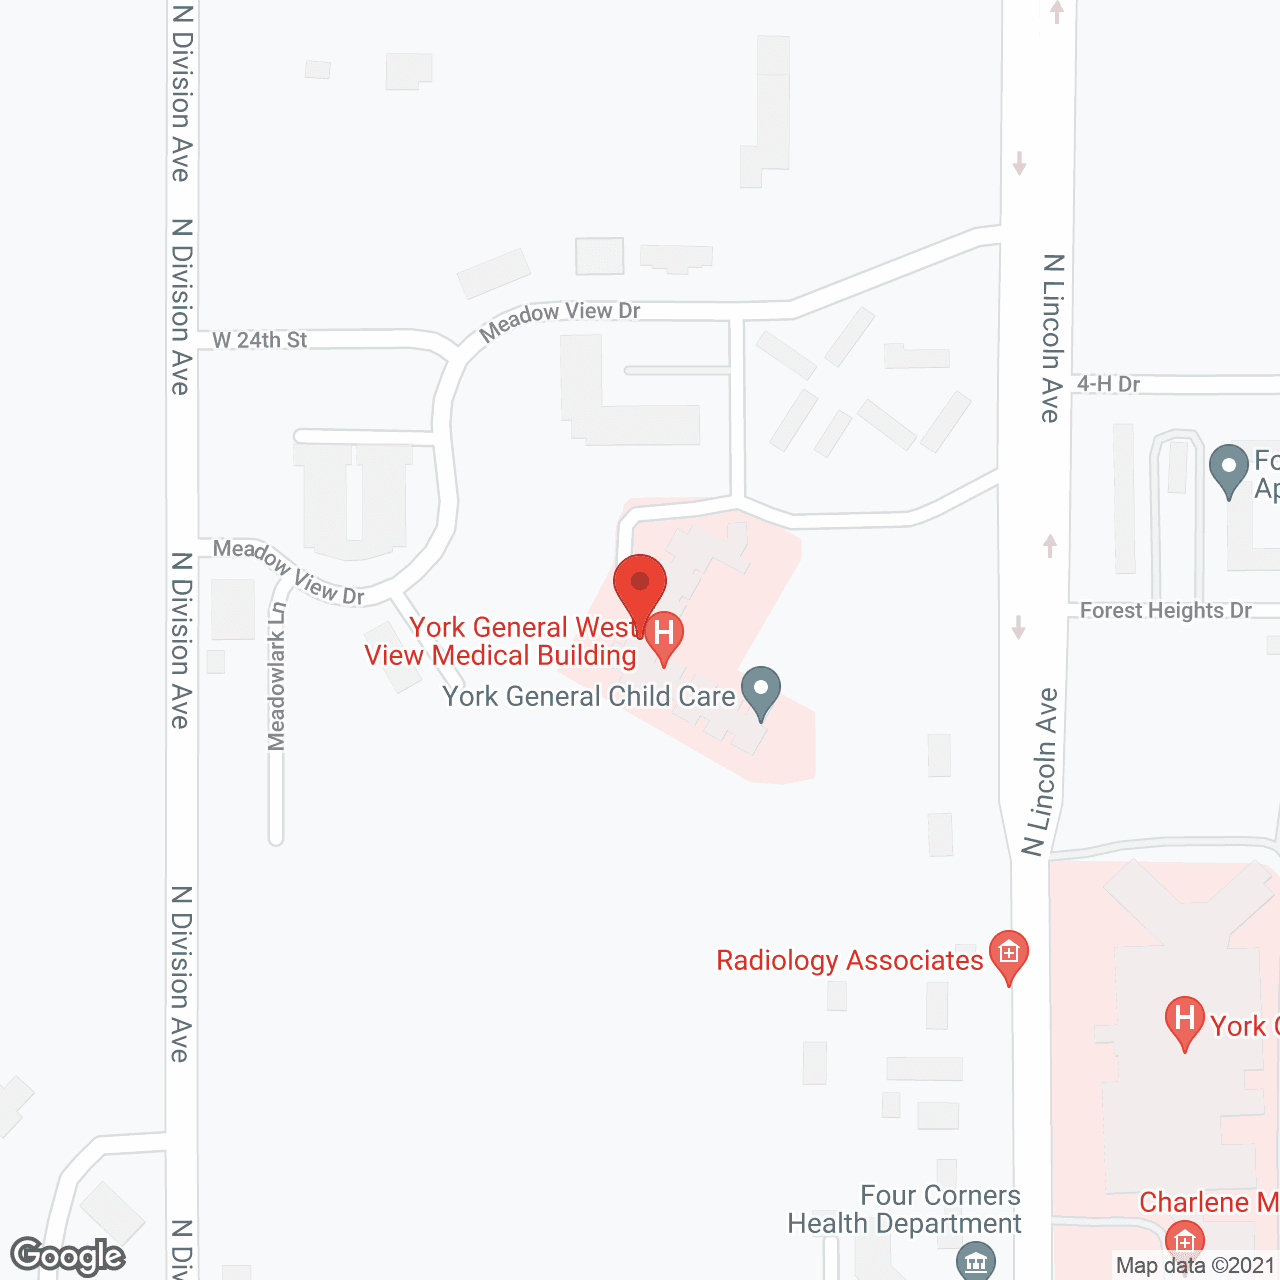 Hearthstone the Nursing Home in google map